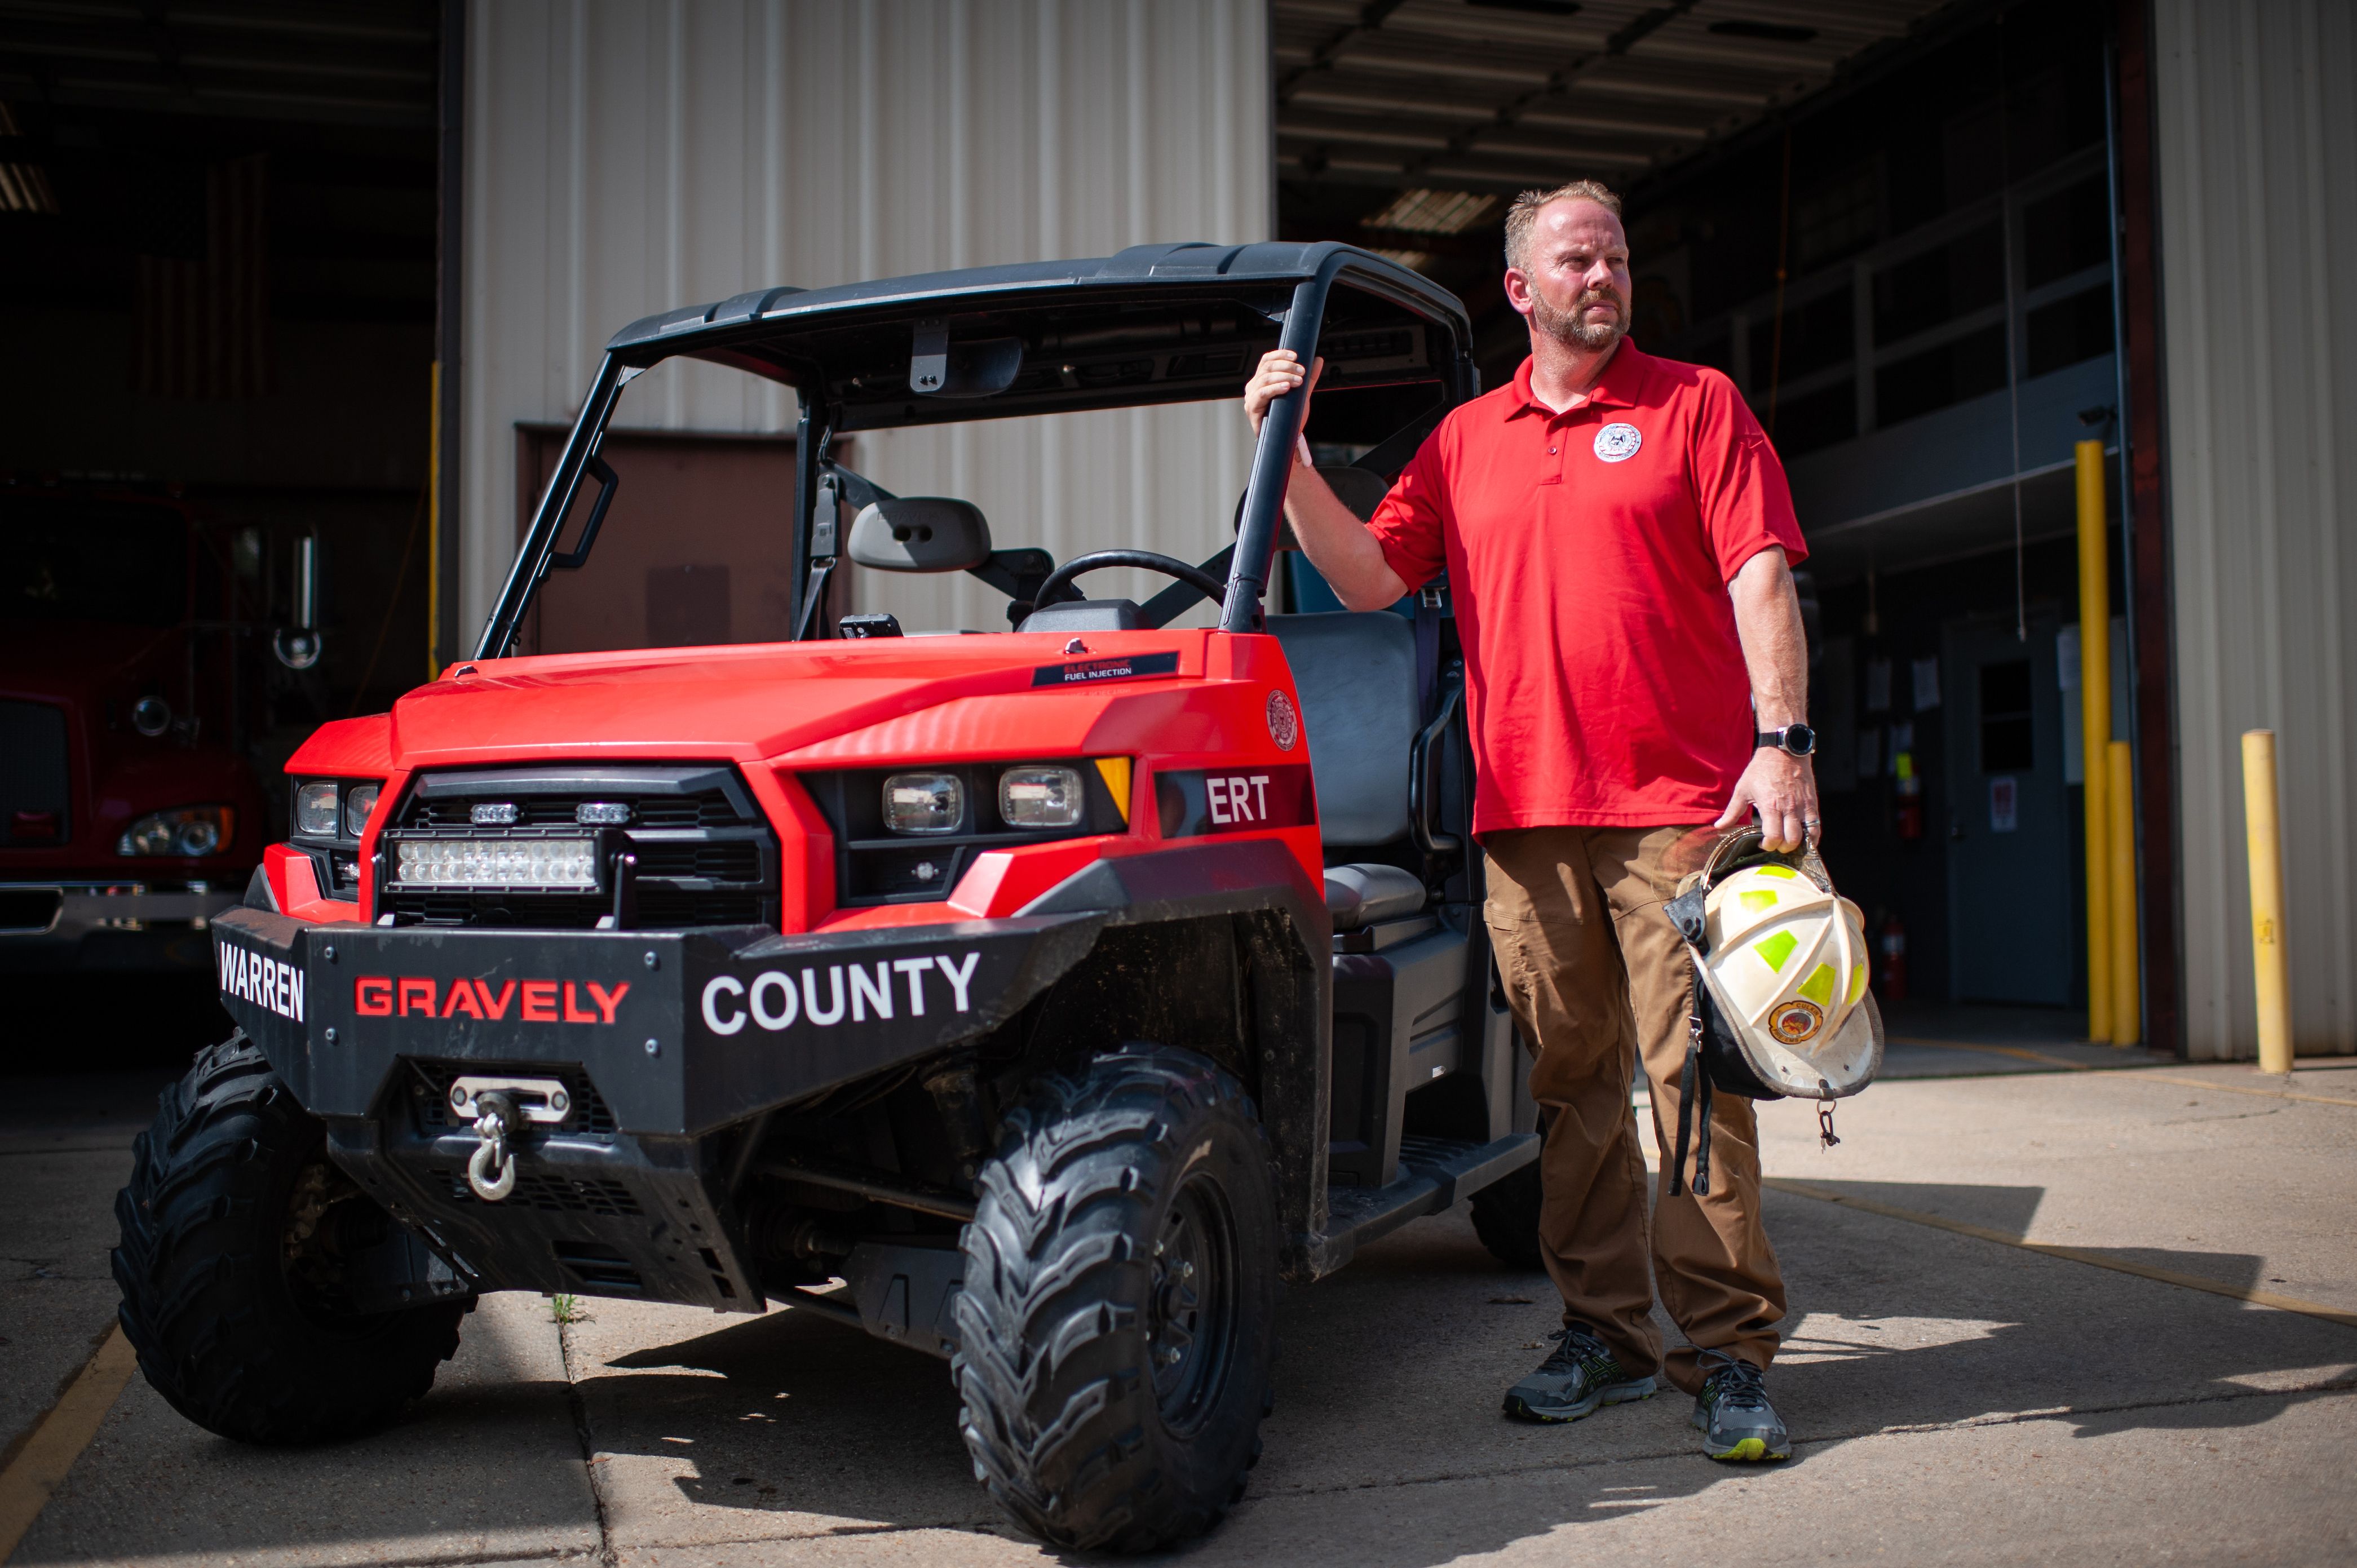 Warren County firefighter Jerry Briggs in July with the utility task vehicle he used during the February 2020 gas leak in Satartia.<br><strong>Rory Doyle for HuffPost</strong>